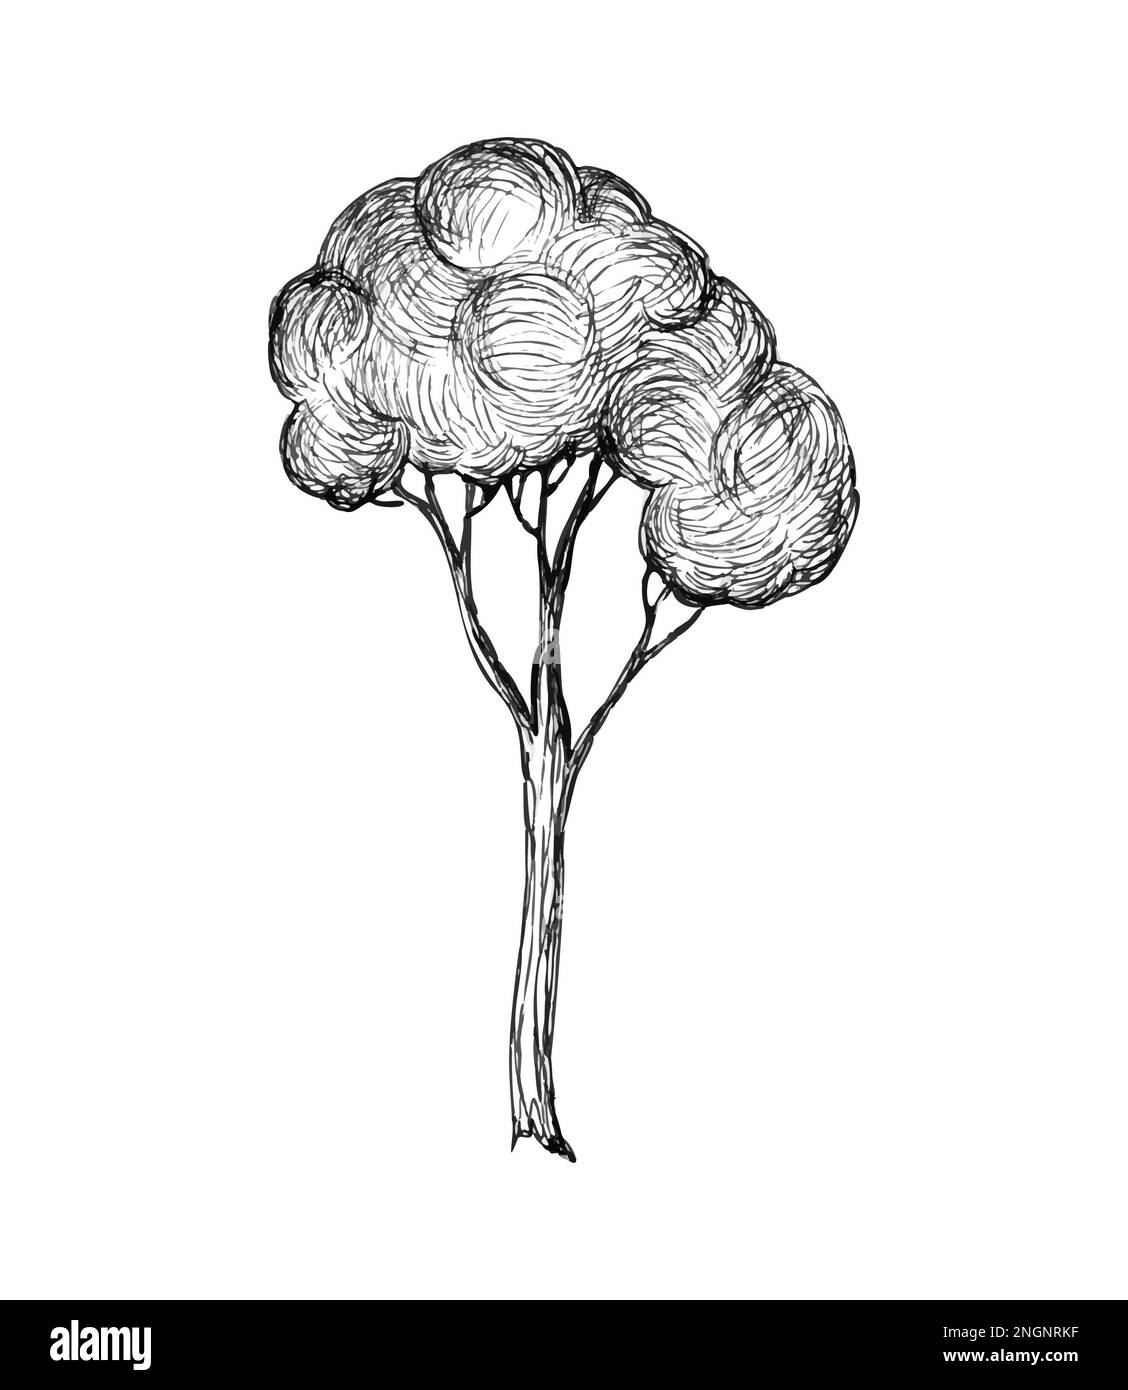 tree in graphics. Hand drawn engraving style Stock Photo